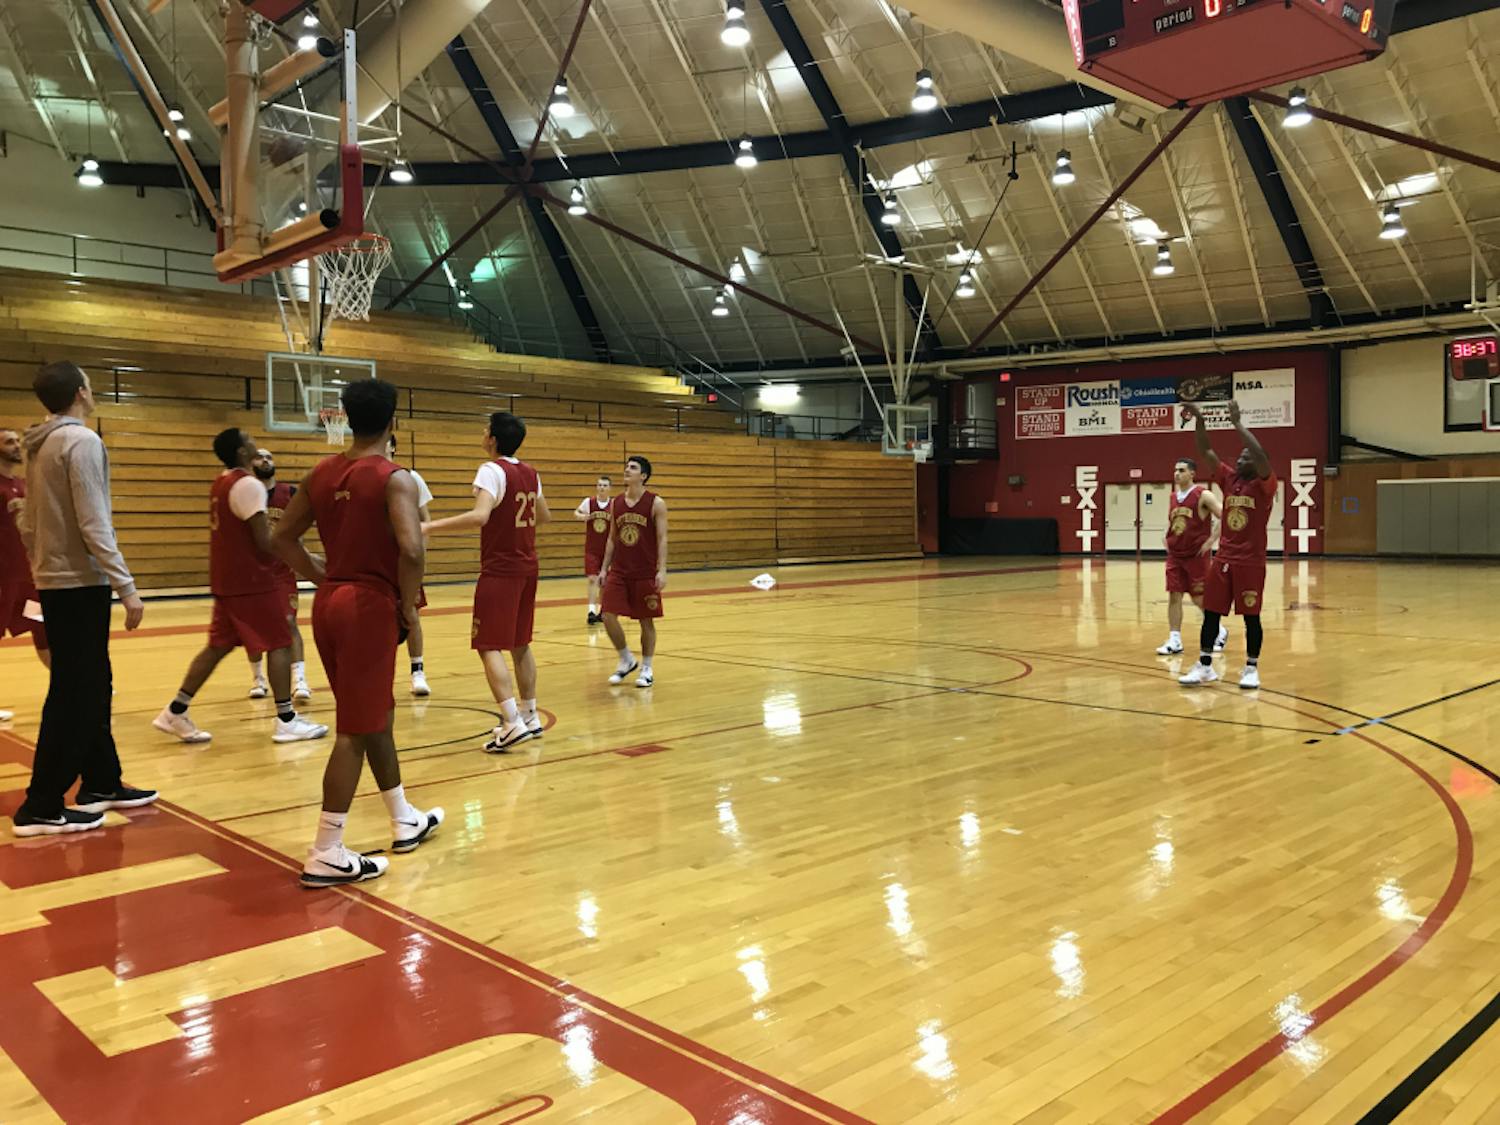 Men's basketball team practicing for match against Ohio Wesleyan